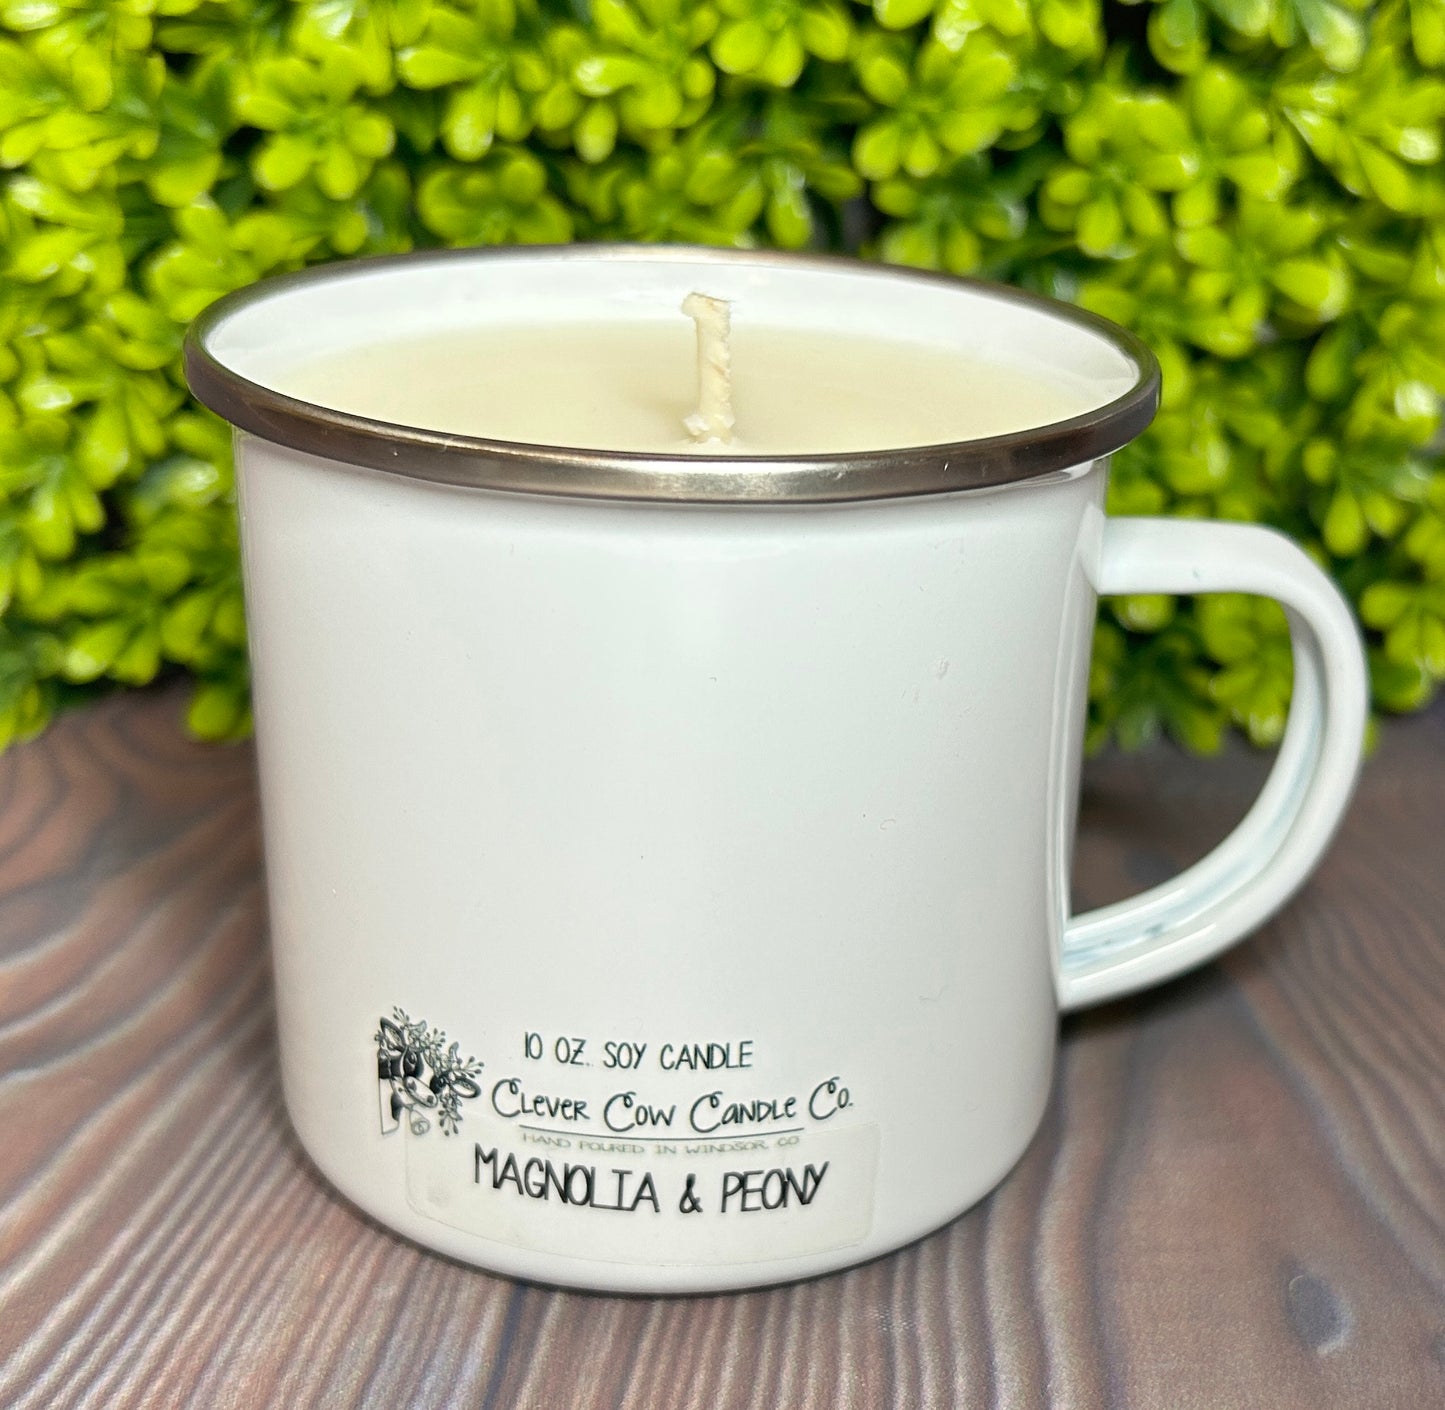 WINTER Wholesale Enamel Mug Candle - CHOICE of DESIGN & SCENT - QTY 3 CANDLES